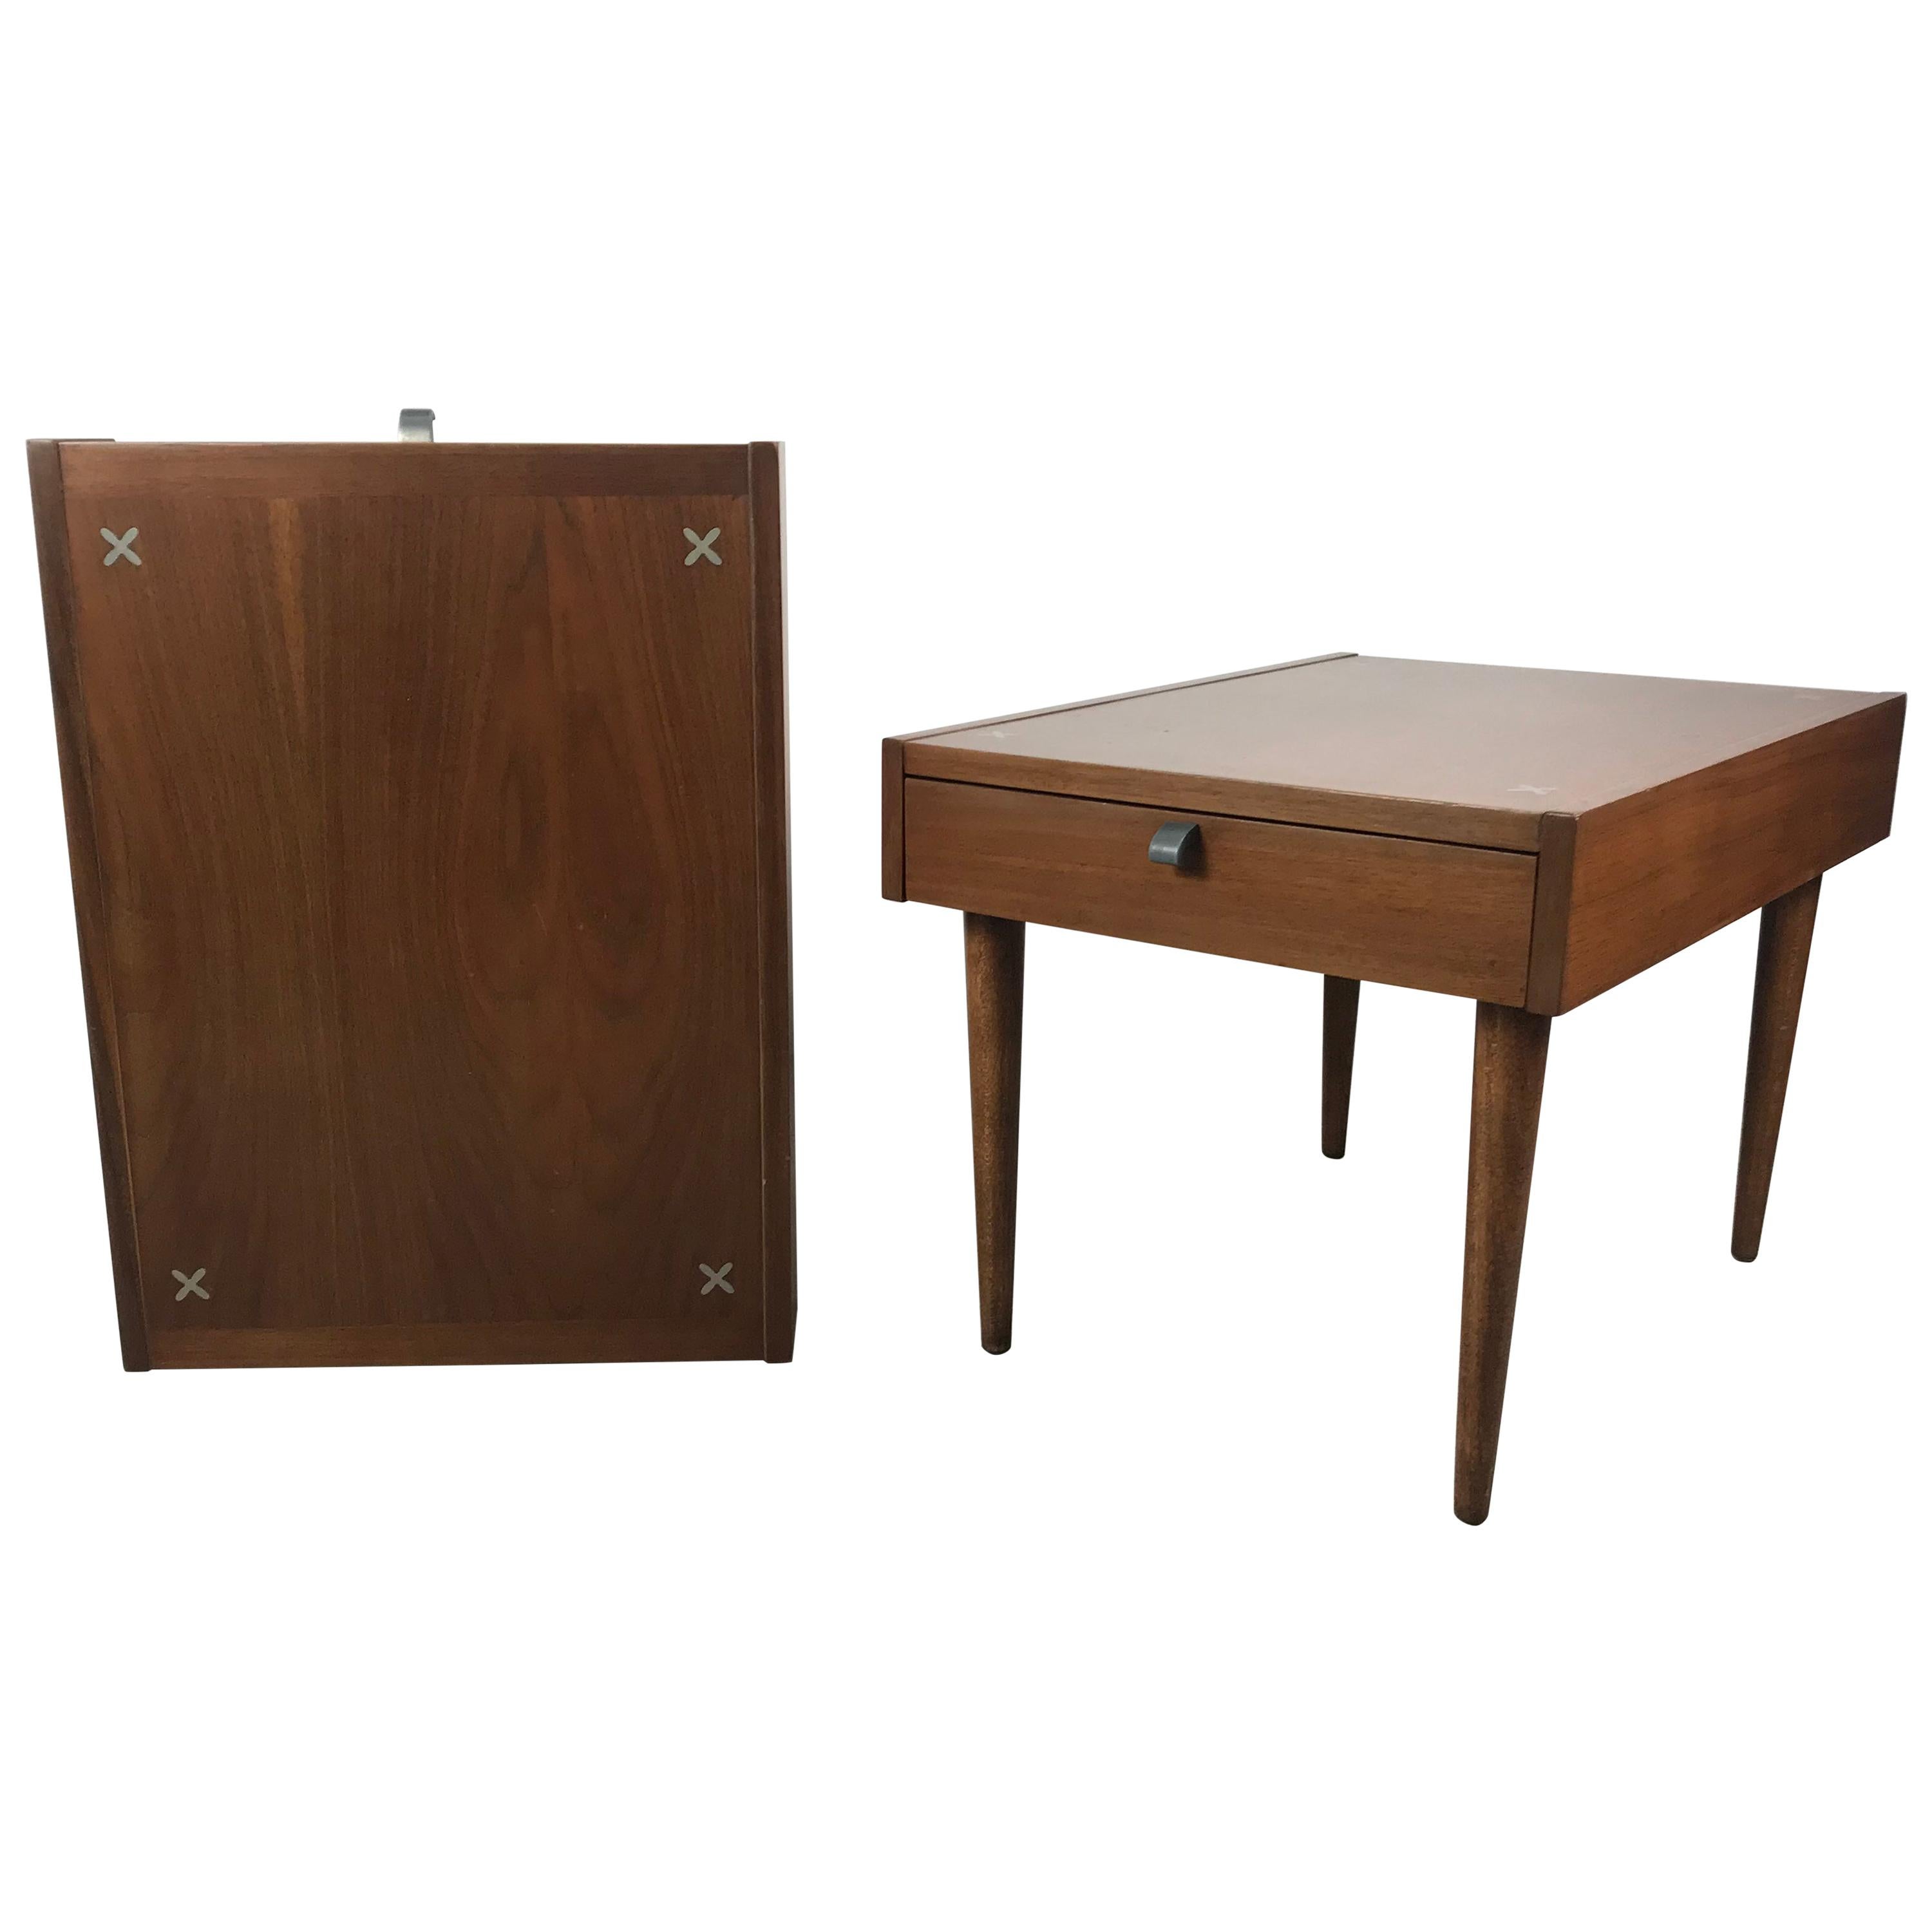 Classic Modernist American of Martinsville Nightstands with Aluminum Inlays